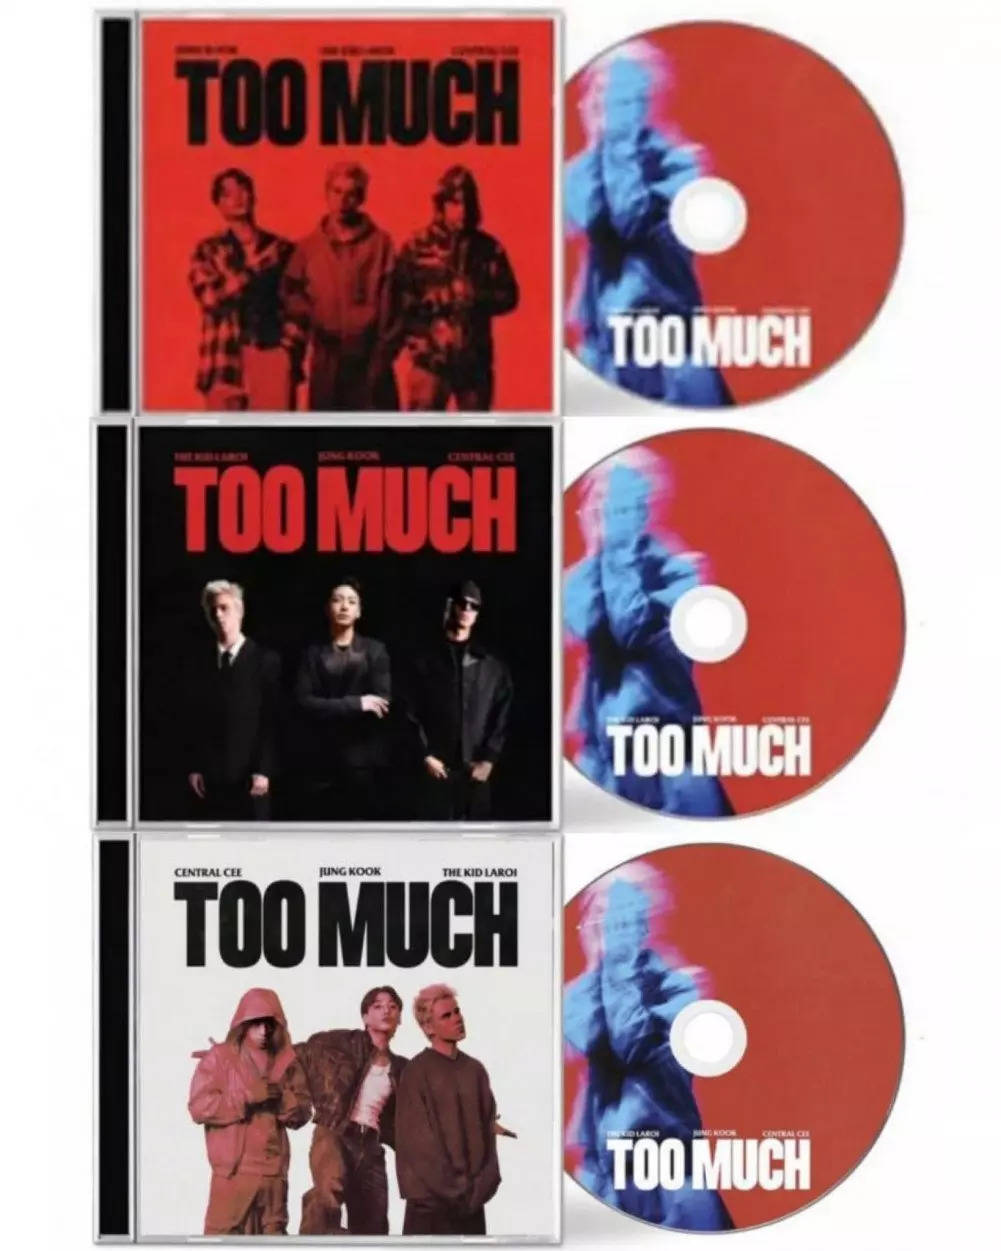 CD for Too Much